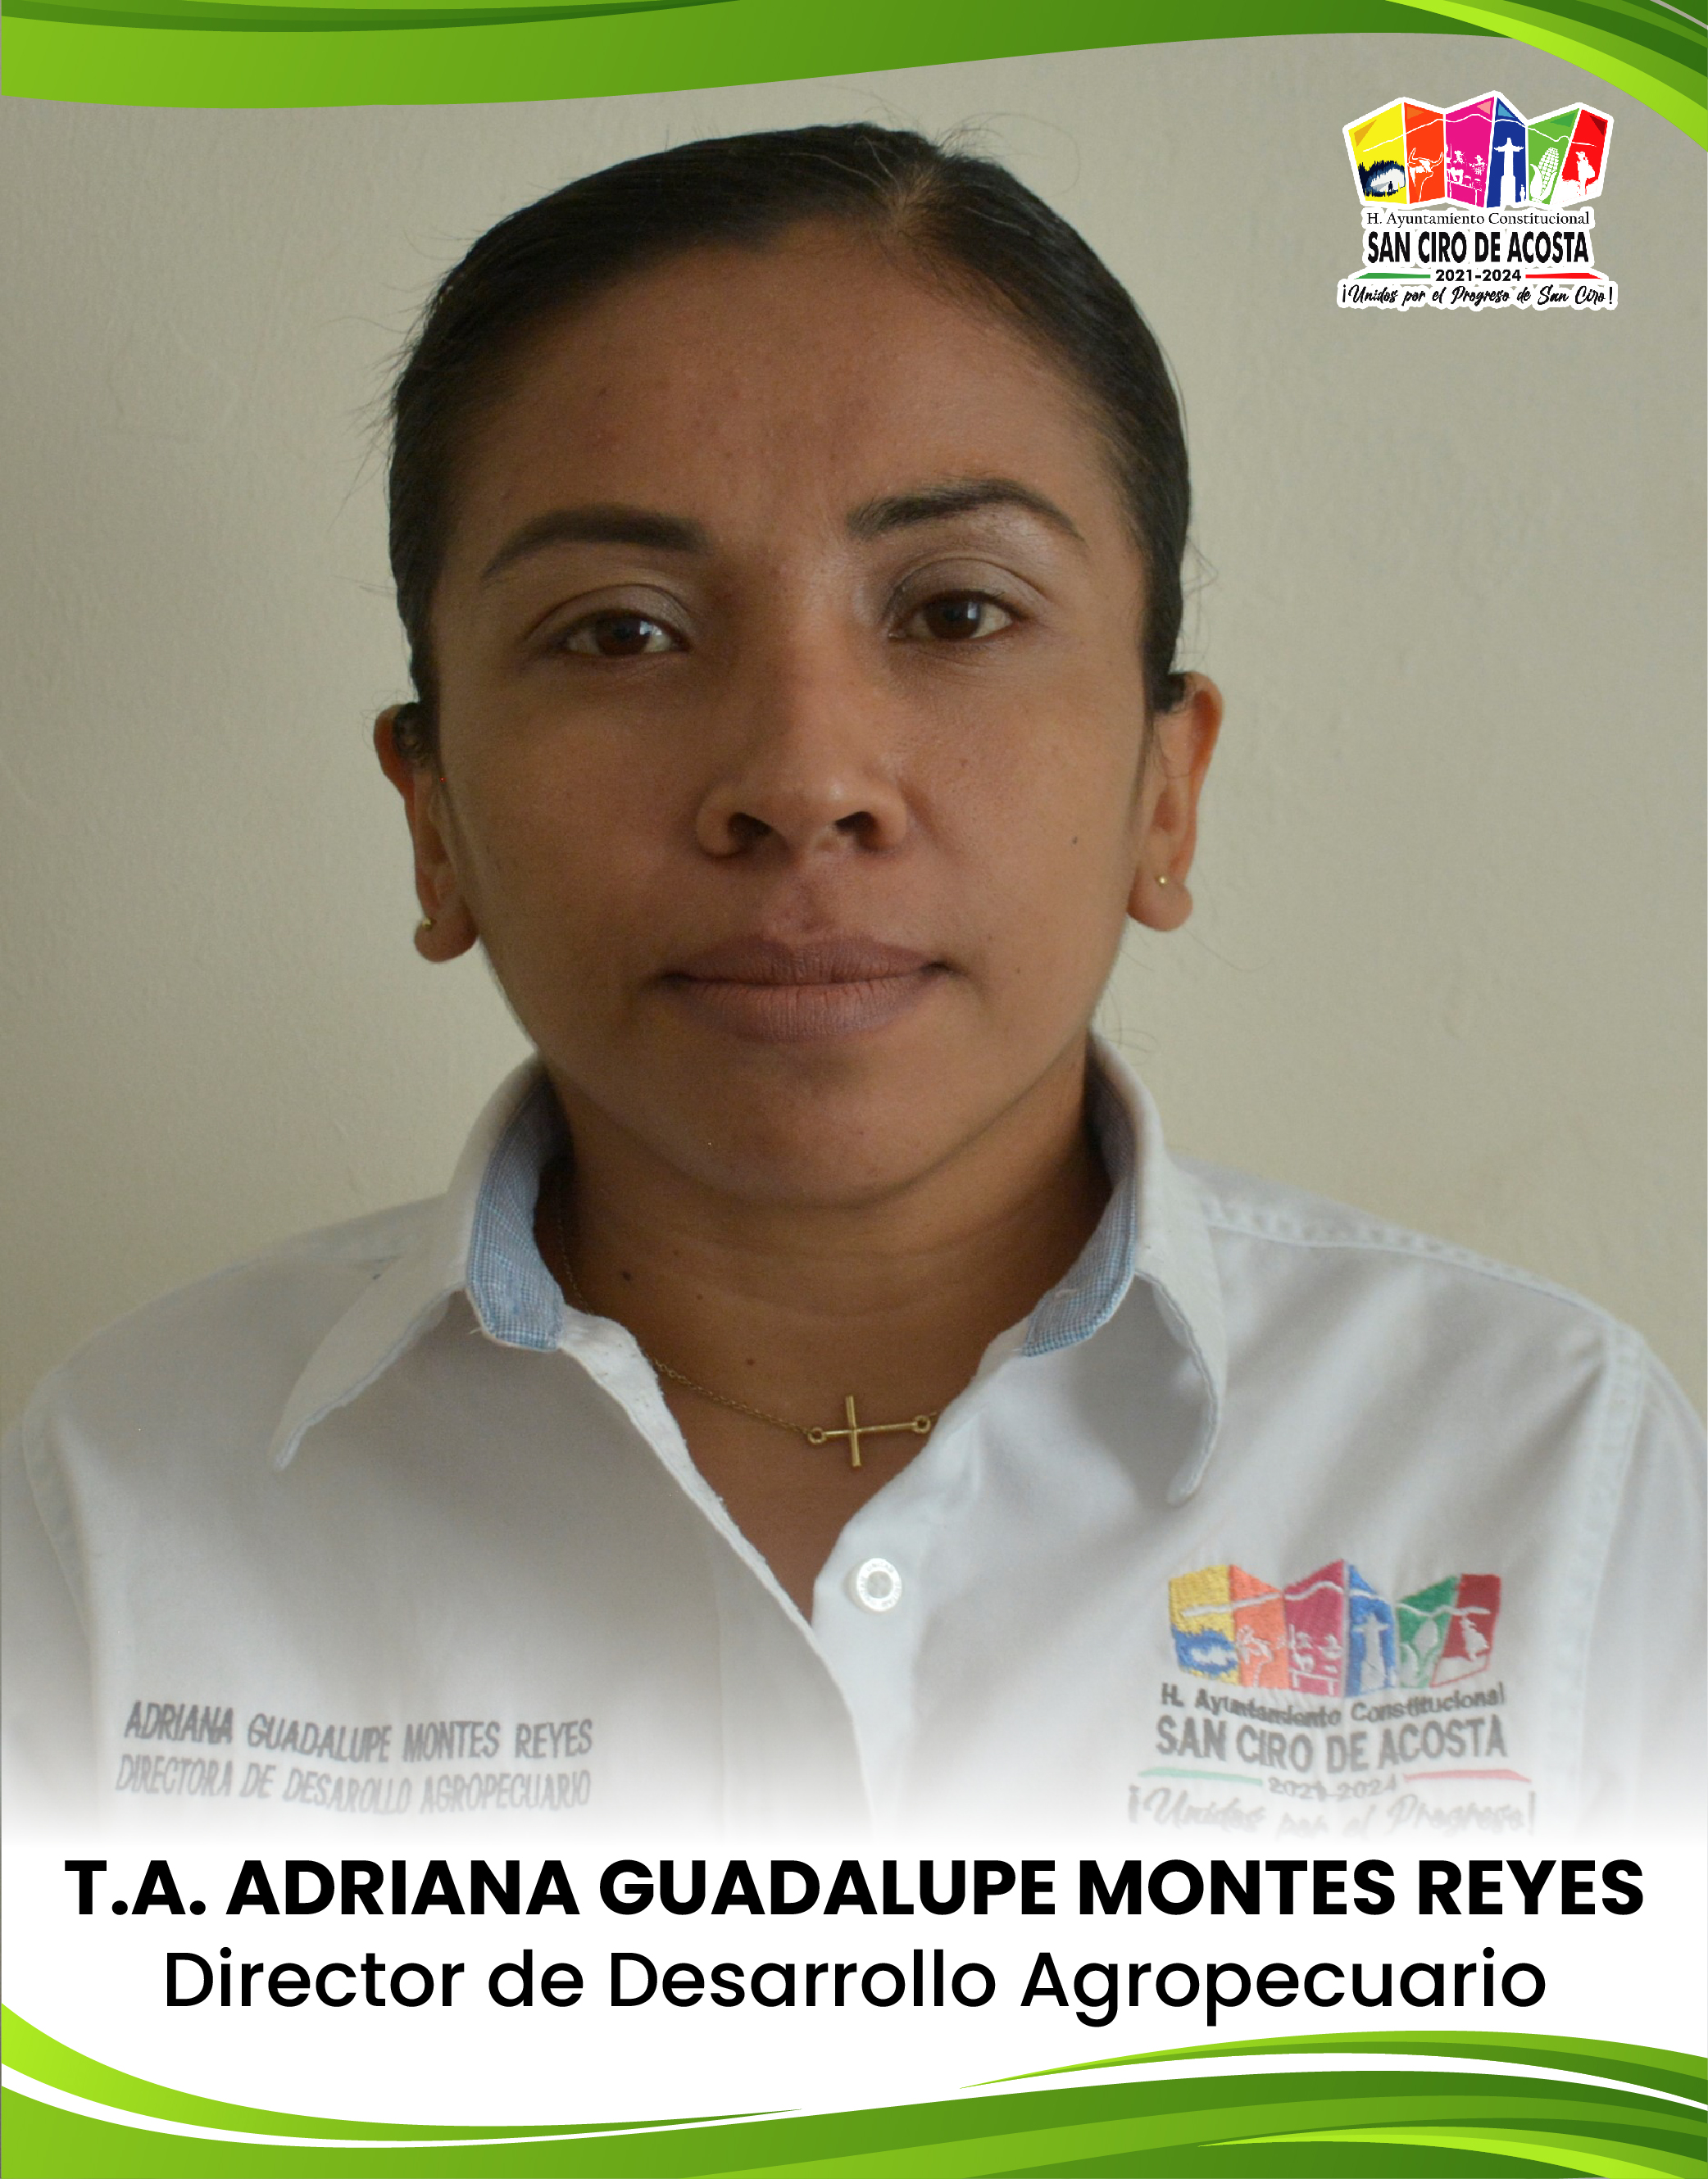 T.A. Adriana Guadalupe Montes Reyes